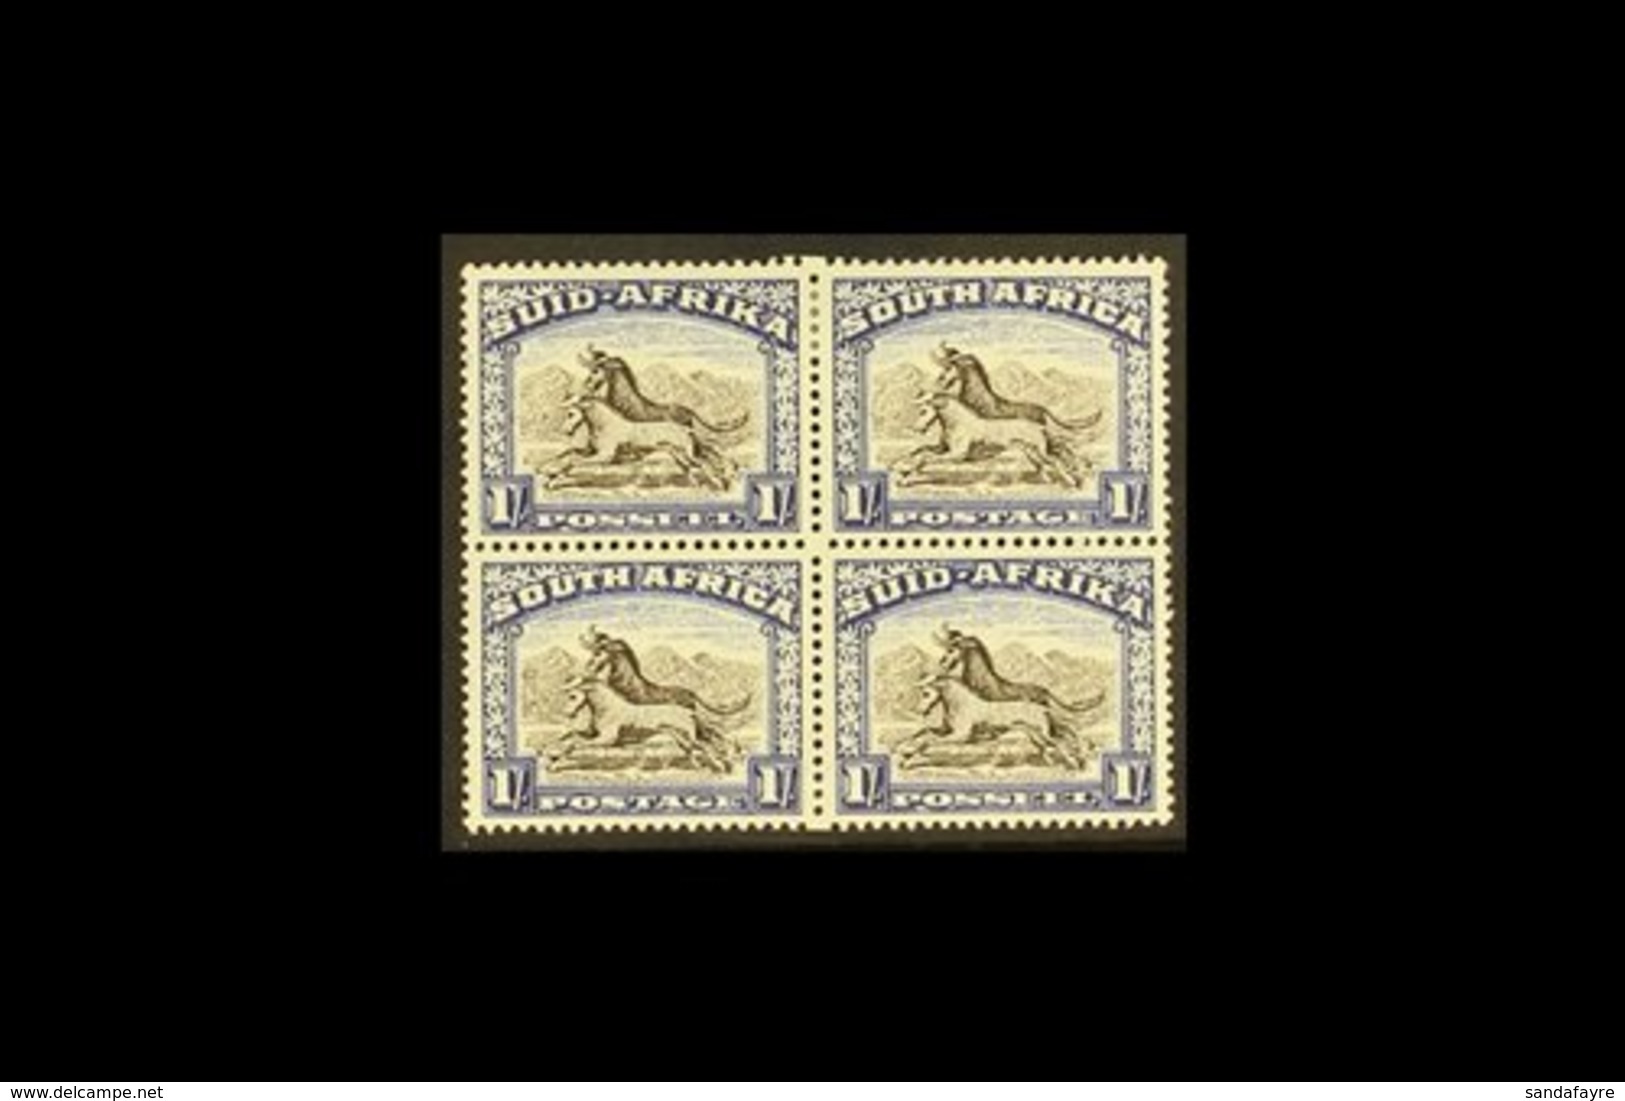 1947-54 1s Blackish Brown & Ultramarine, Issue 5, MISSING PERF HOLE At Centre Of Block Of 4, Union Handbook V4, SG 120a, - Ohne Zuordnung